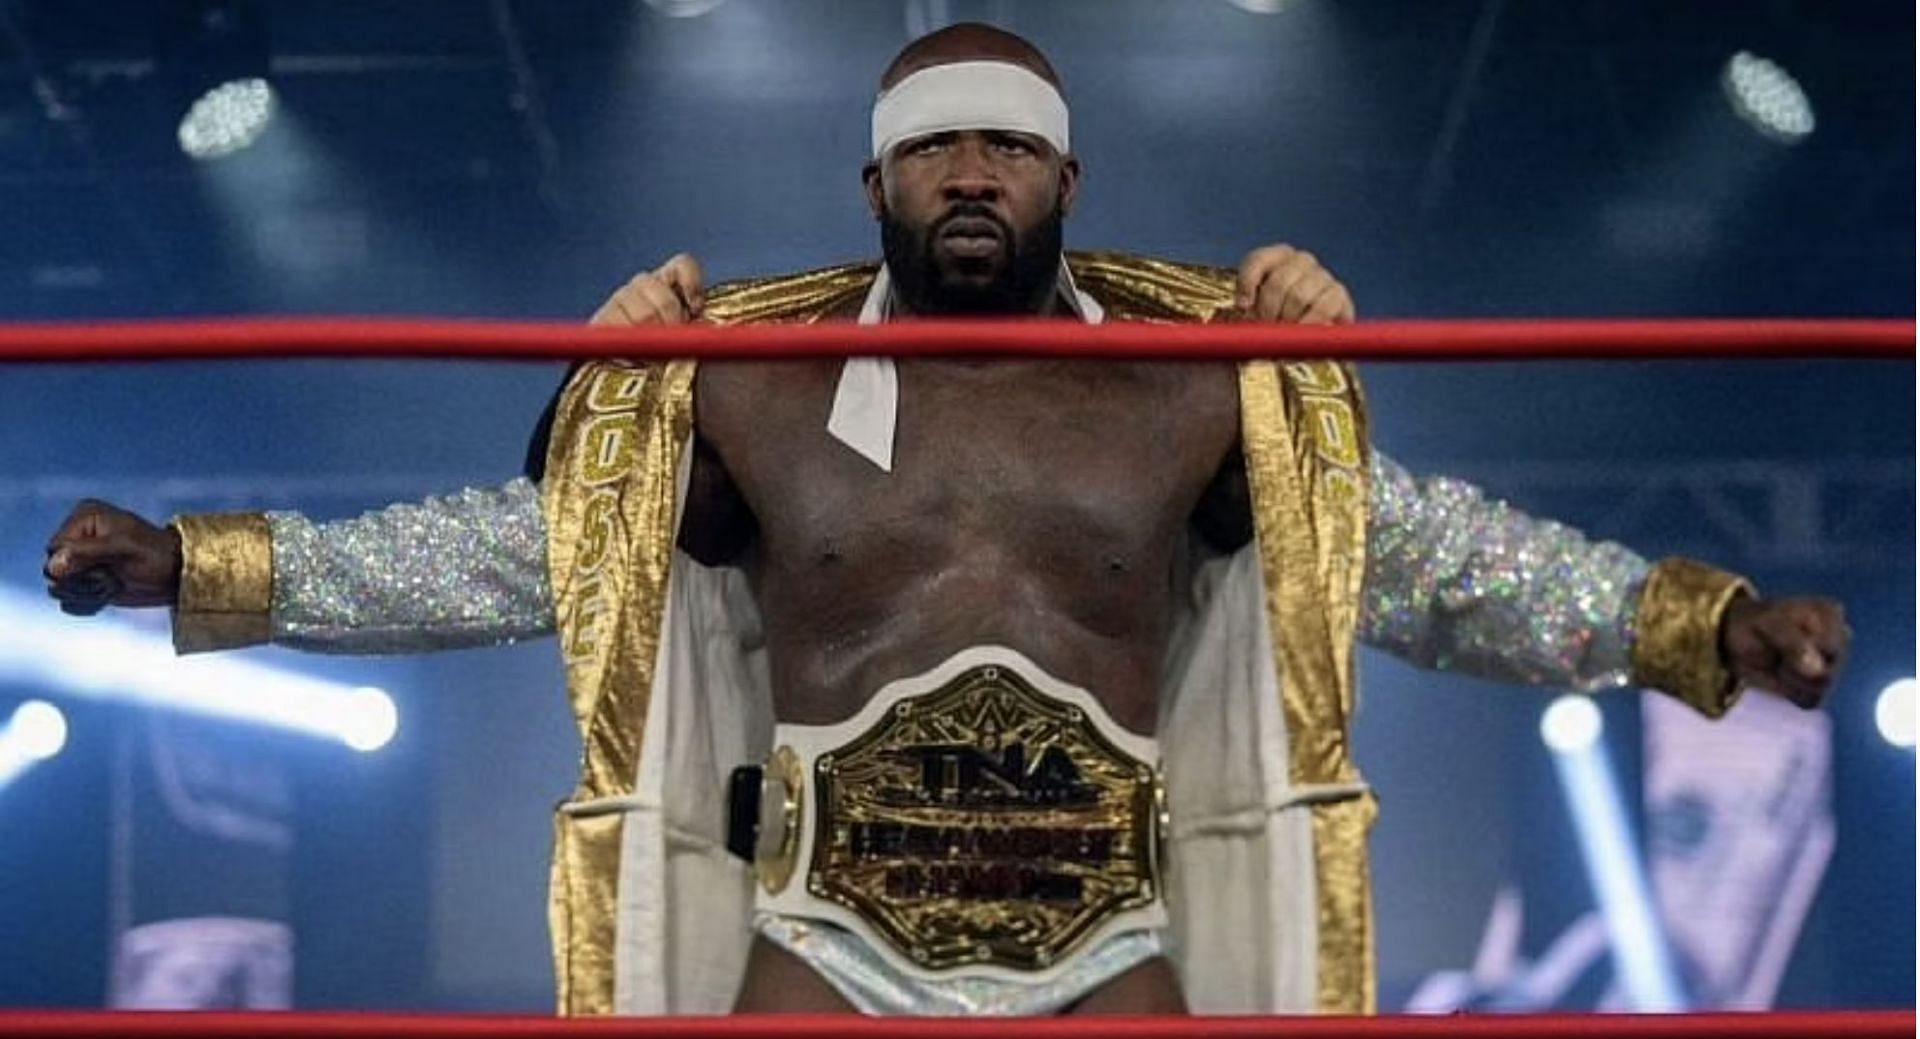 Moose is a two-time world champion in IMPACT Wrestling